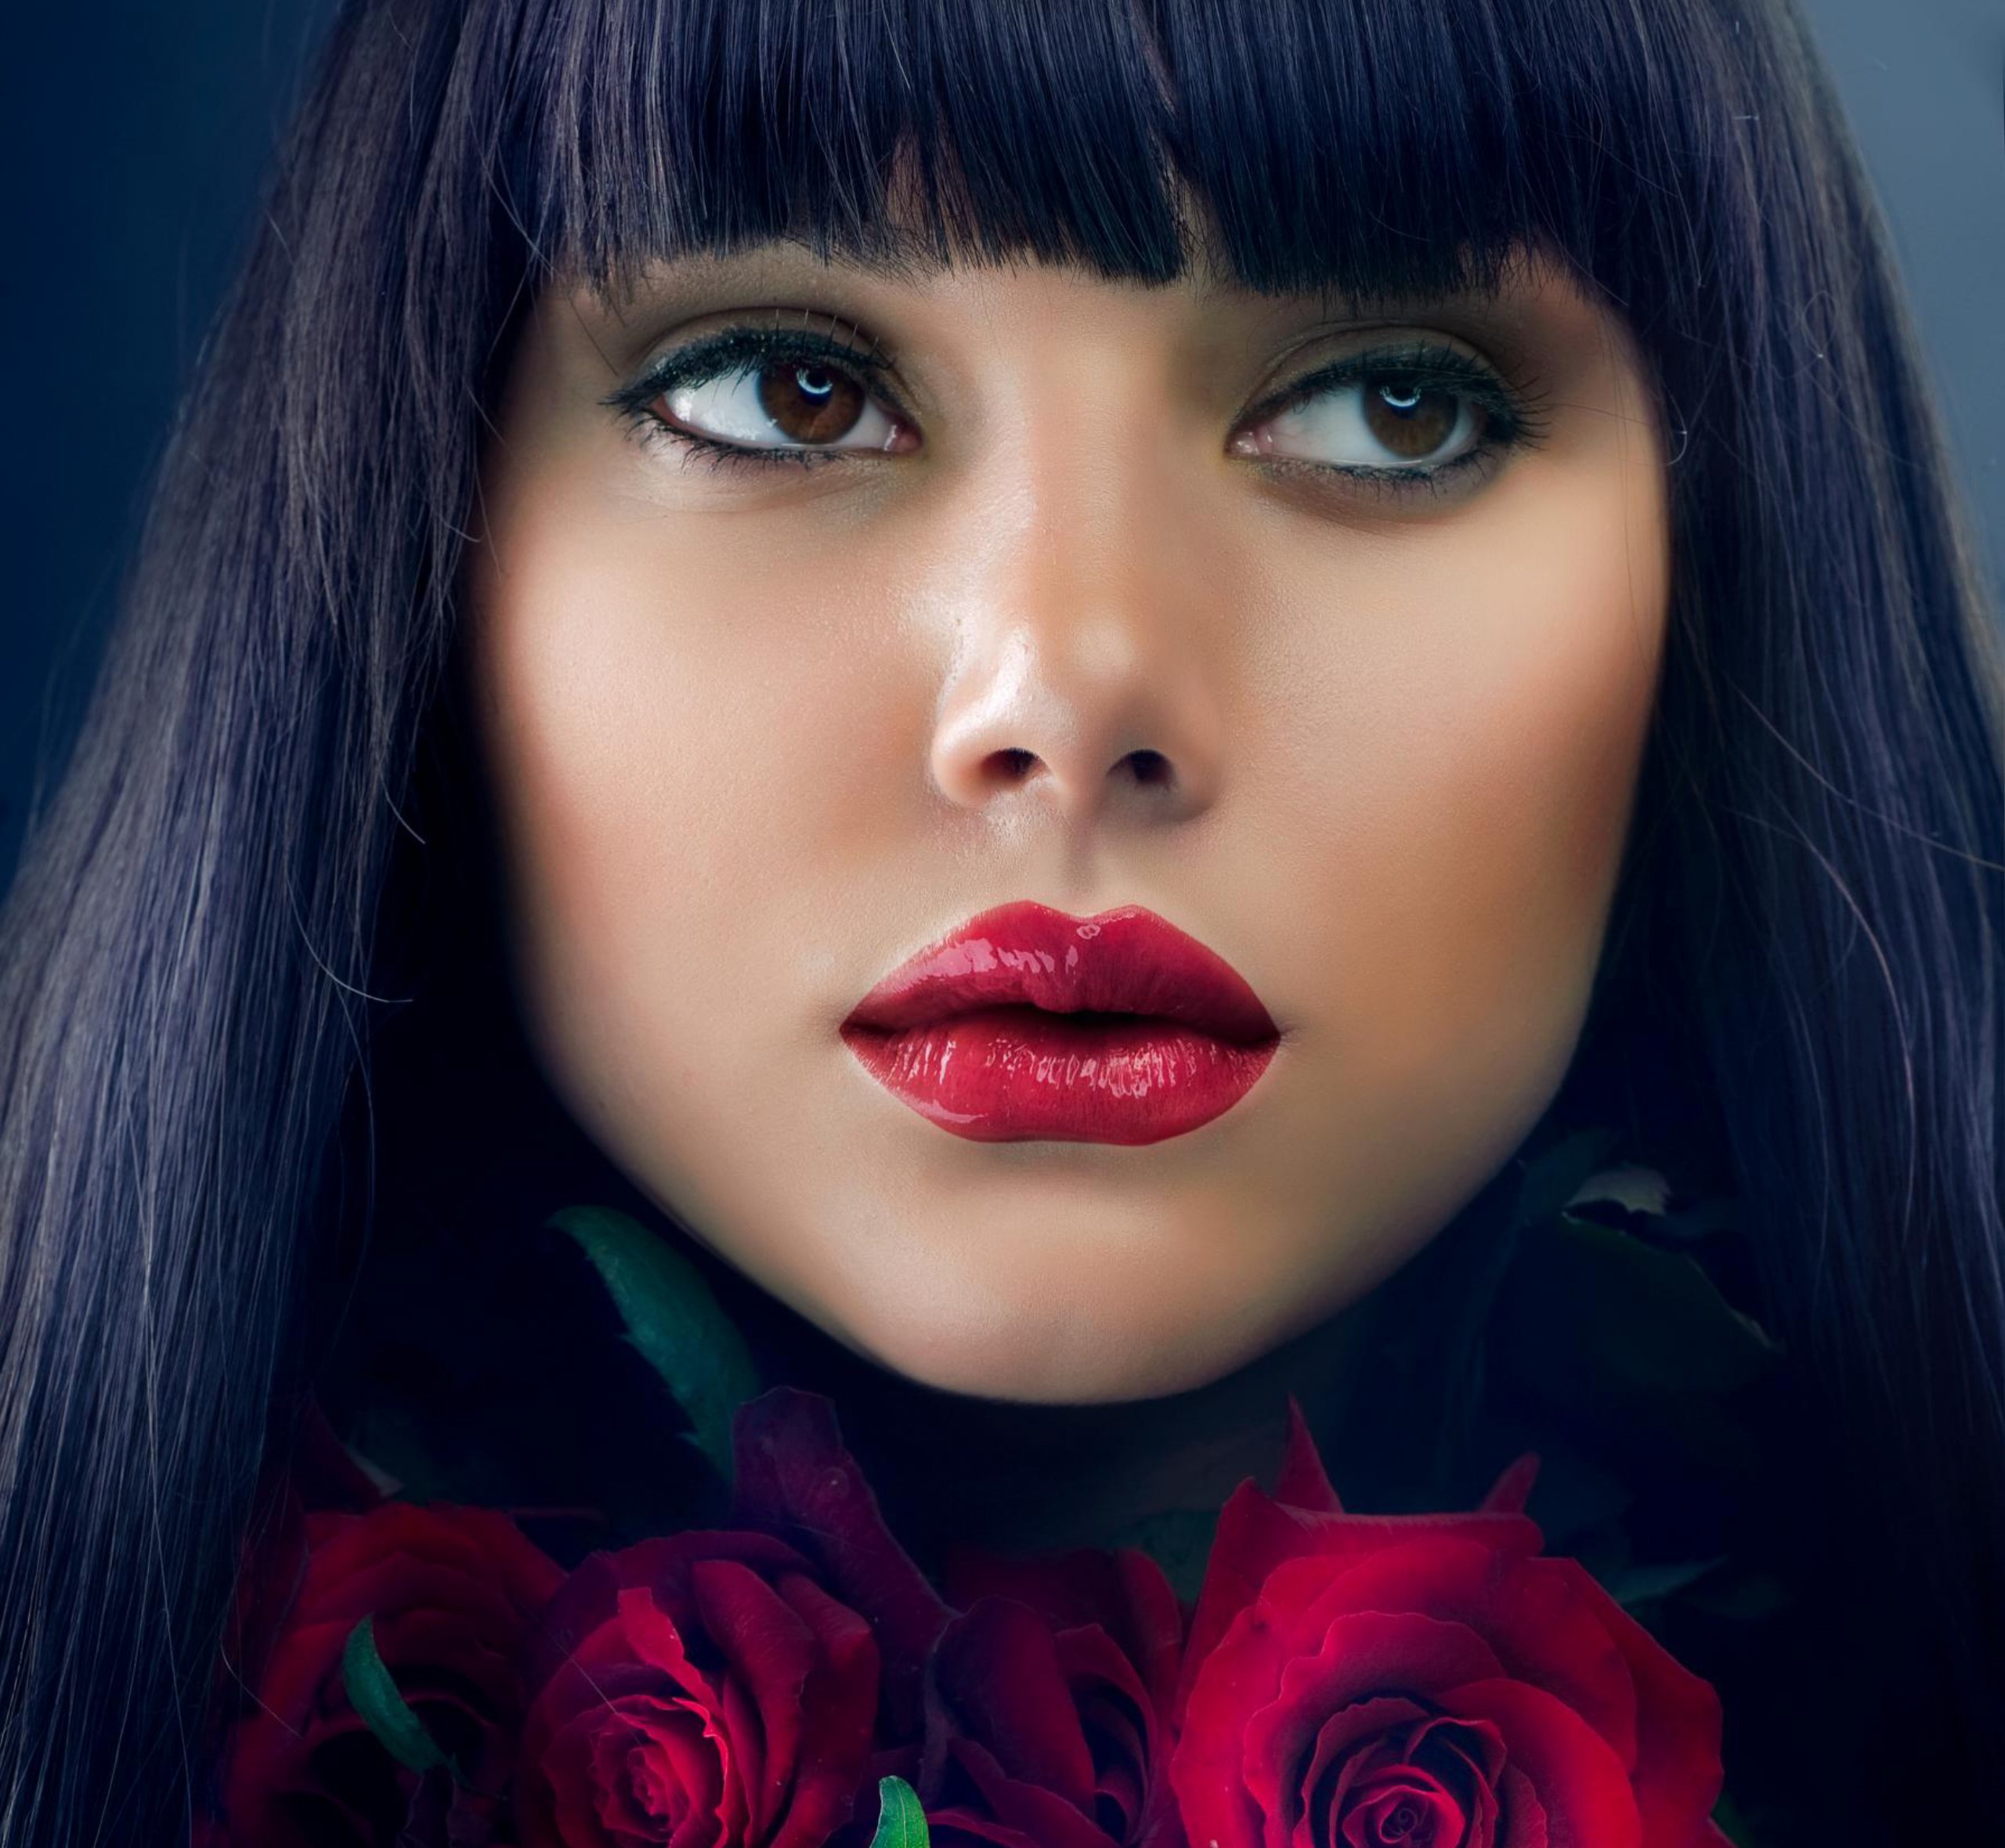 red, Lovely, Beautiful, Woman, Makeup, Hair, People, Red, Roses, Pretty, Brunette, Female, Beauty, Roses, Girl, Face, Red, Lips, Red, Rose, Photography, Eyes, Lips, Rose Wallpaper